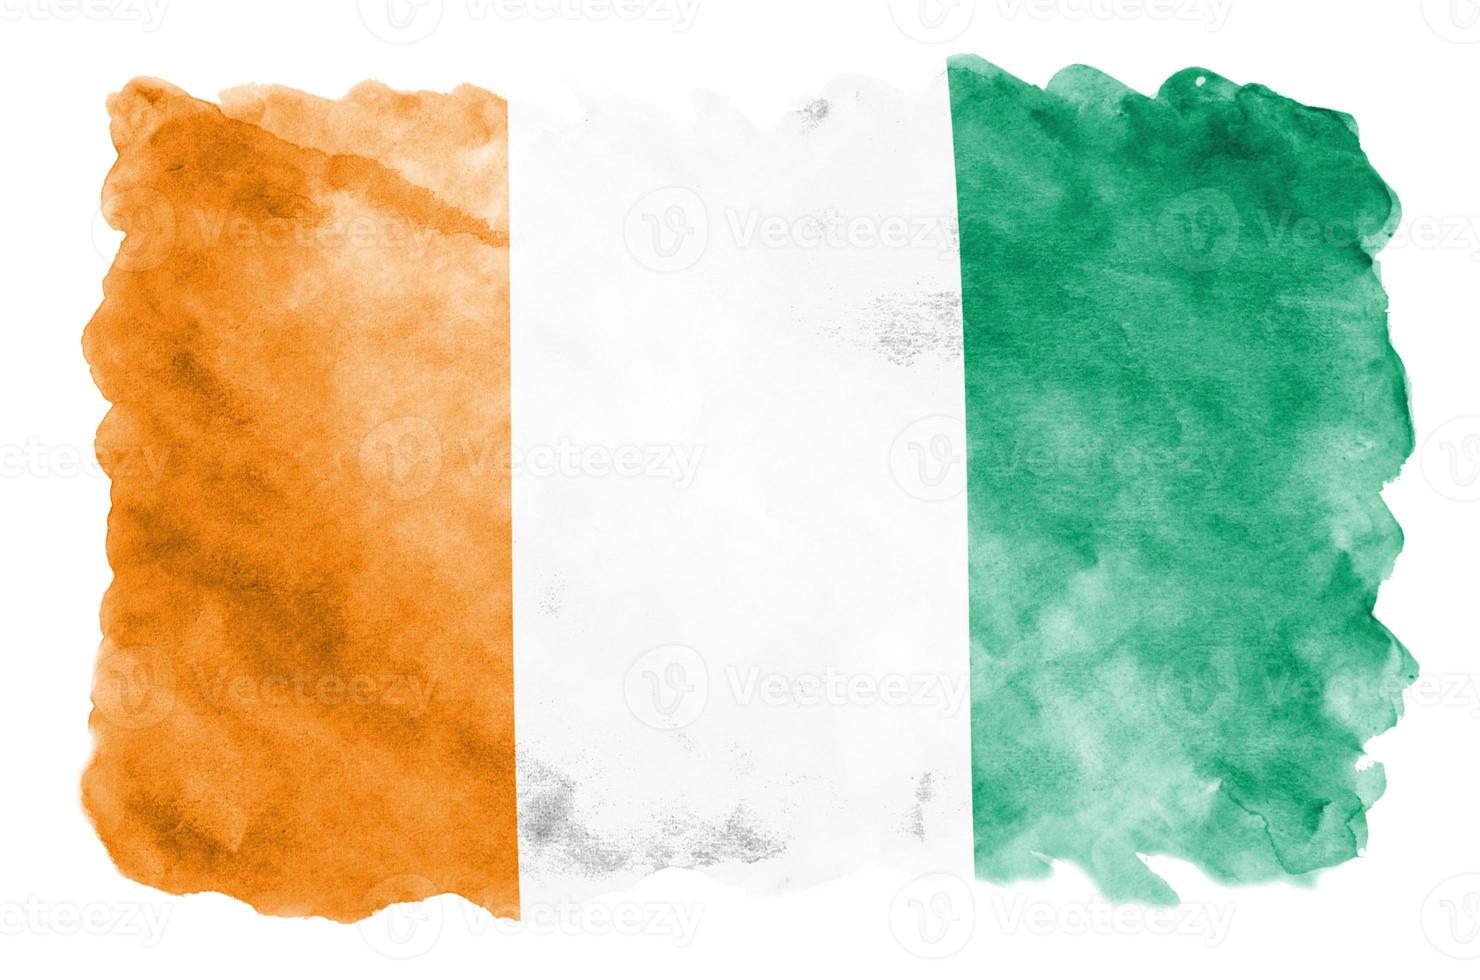 Ivory Coast flag is depicted in liquid watercolor style isolated on white background photo